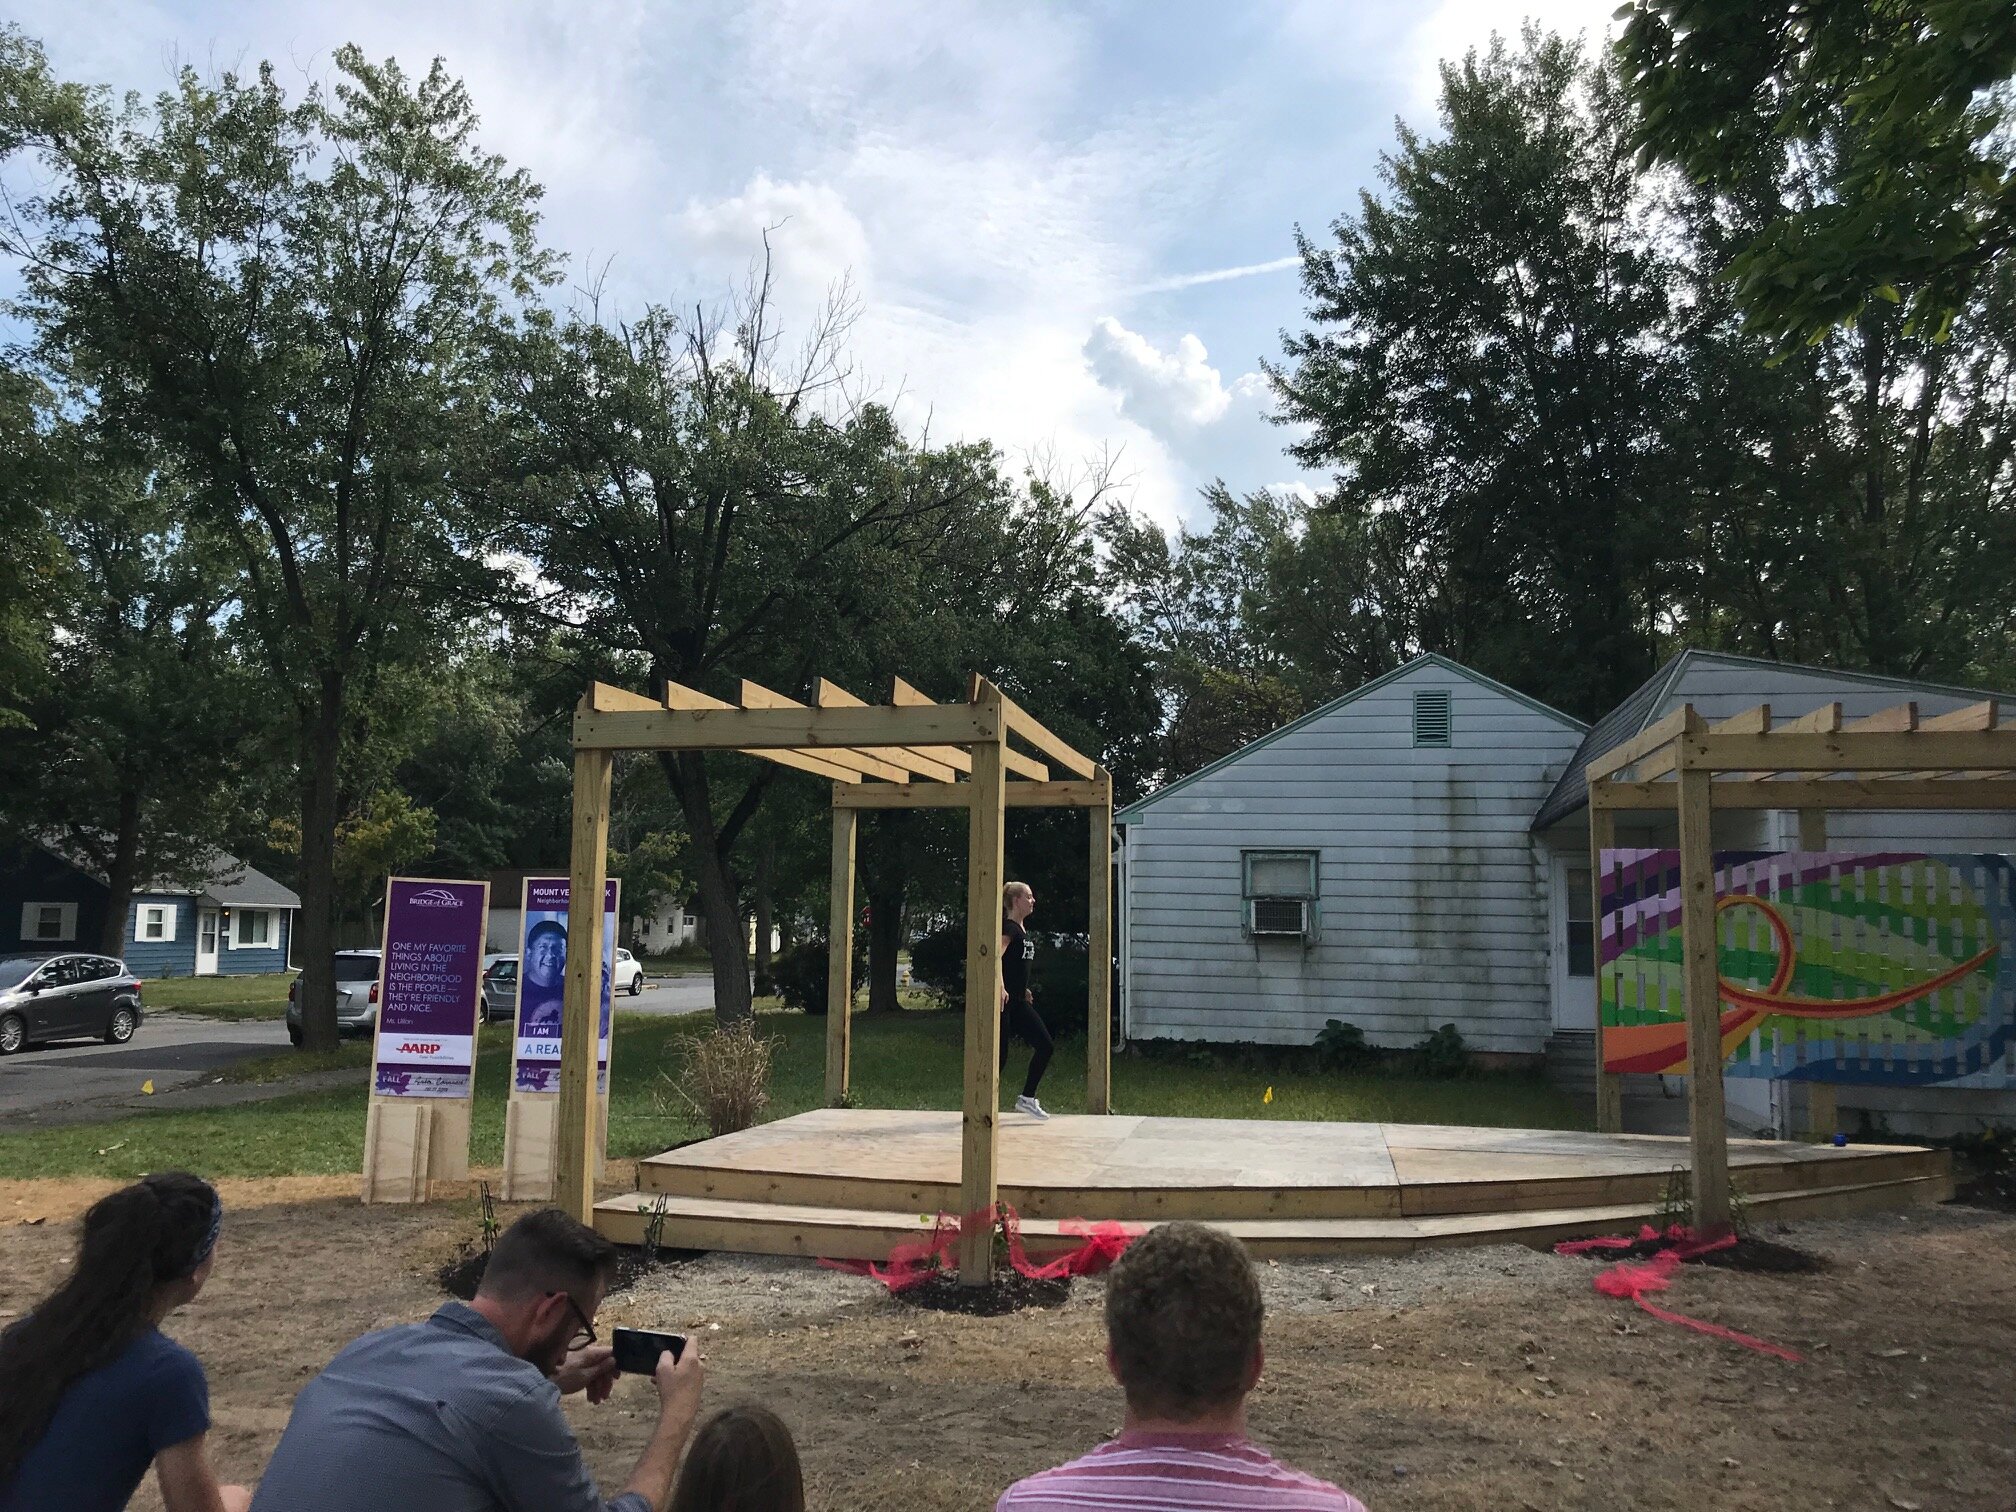 In 2019, Bridge of Grace used the AARP grant to install more than banners, swings in empty lots, and complete pocket parks in Mount Vernon Park.